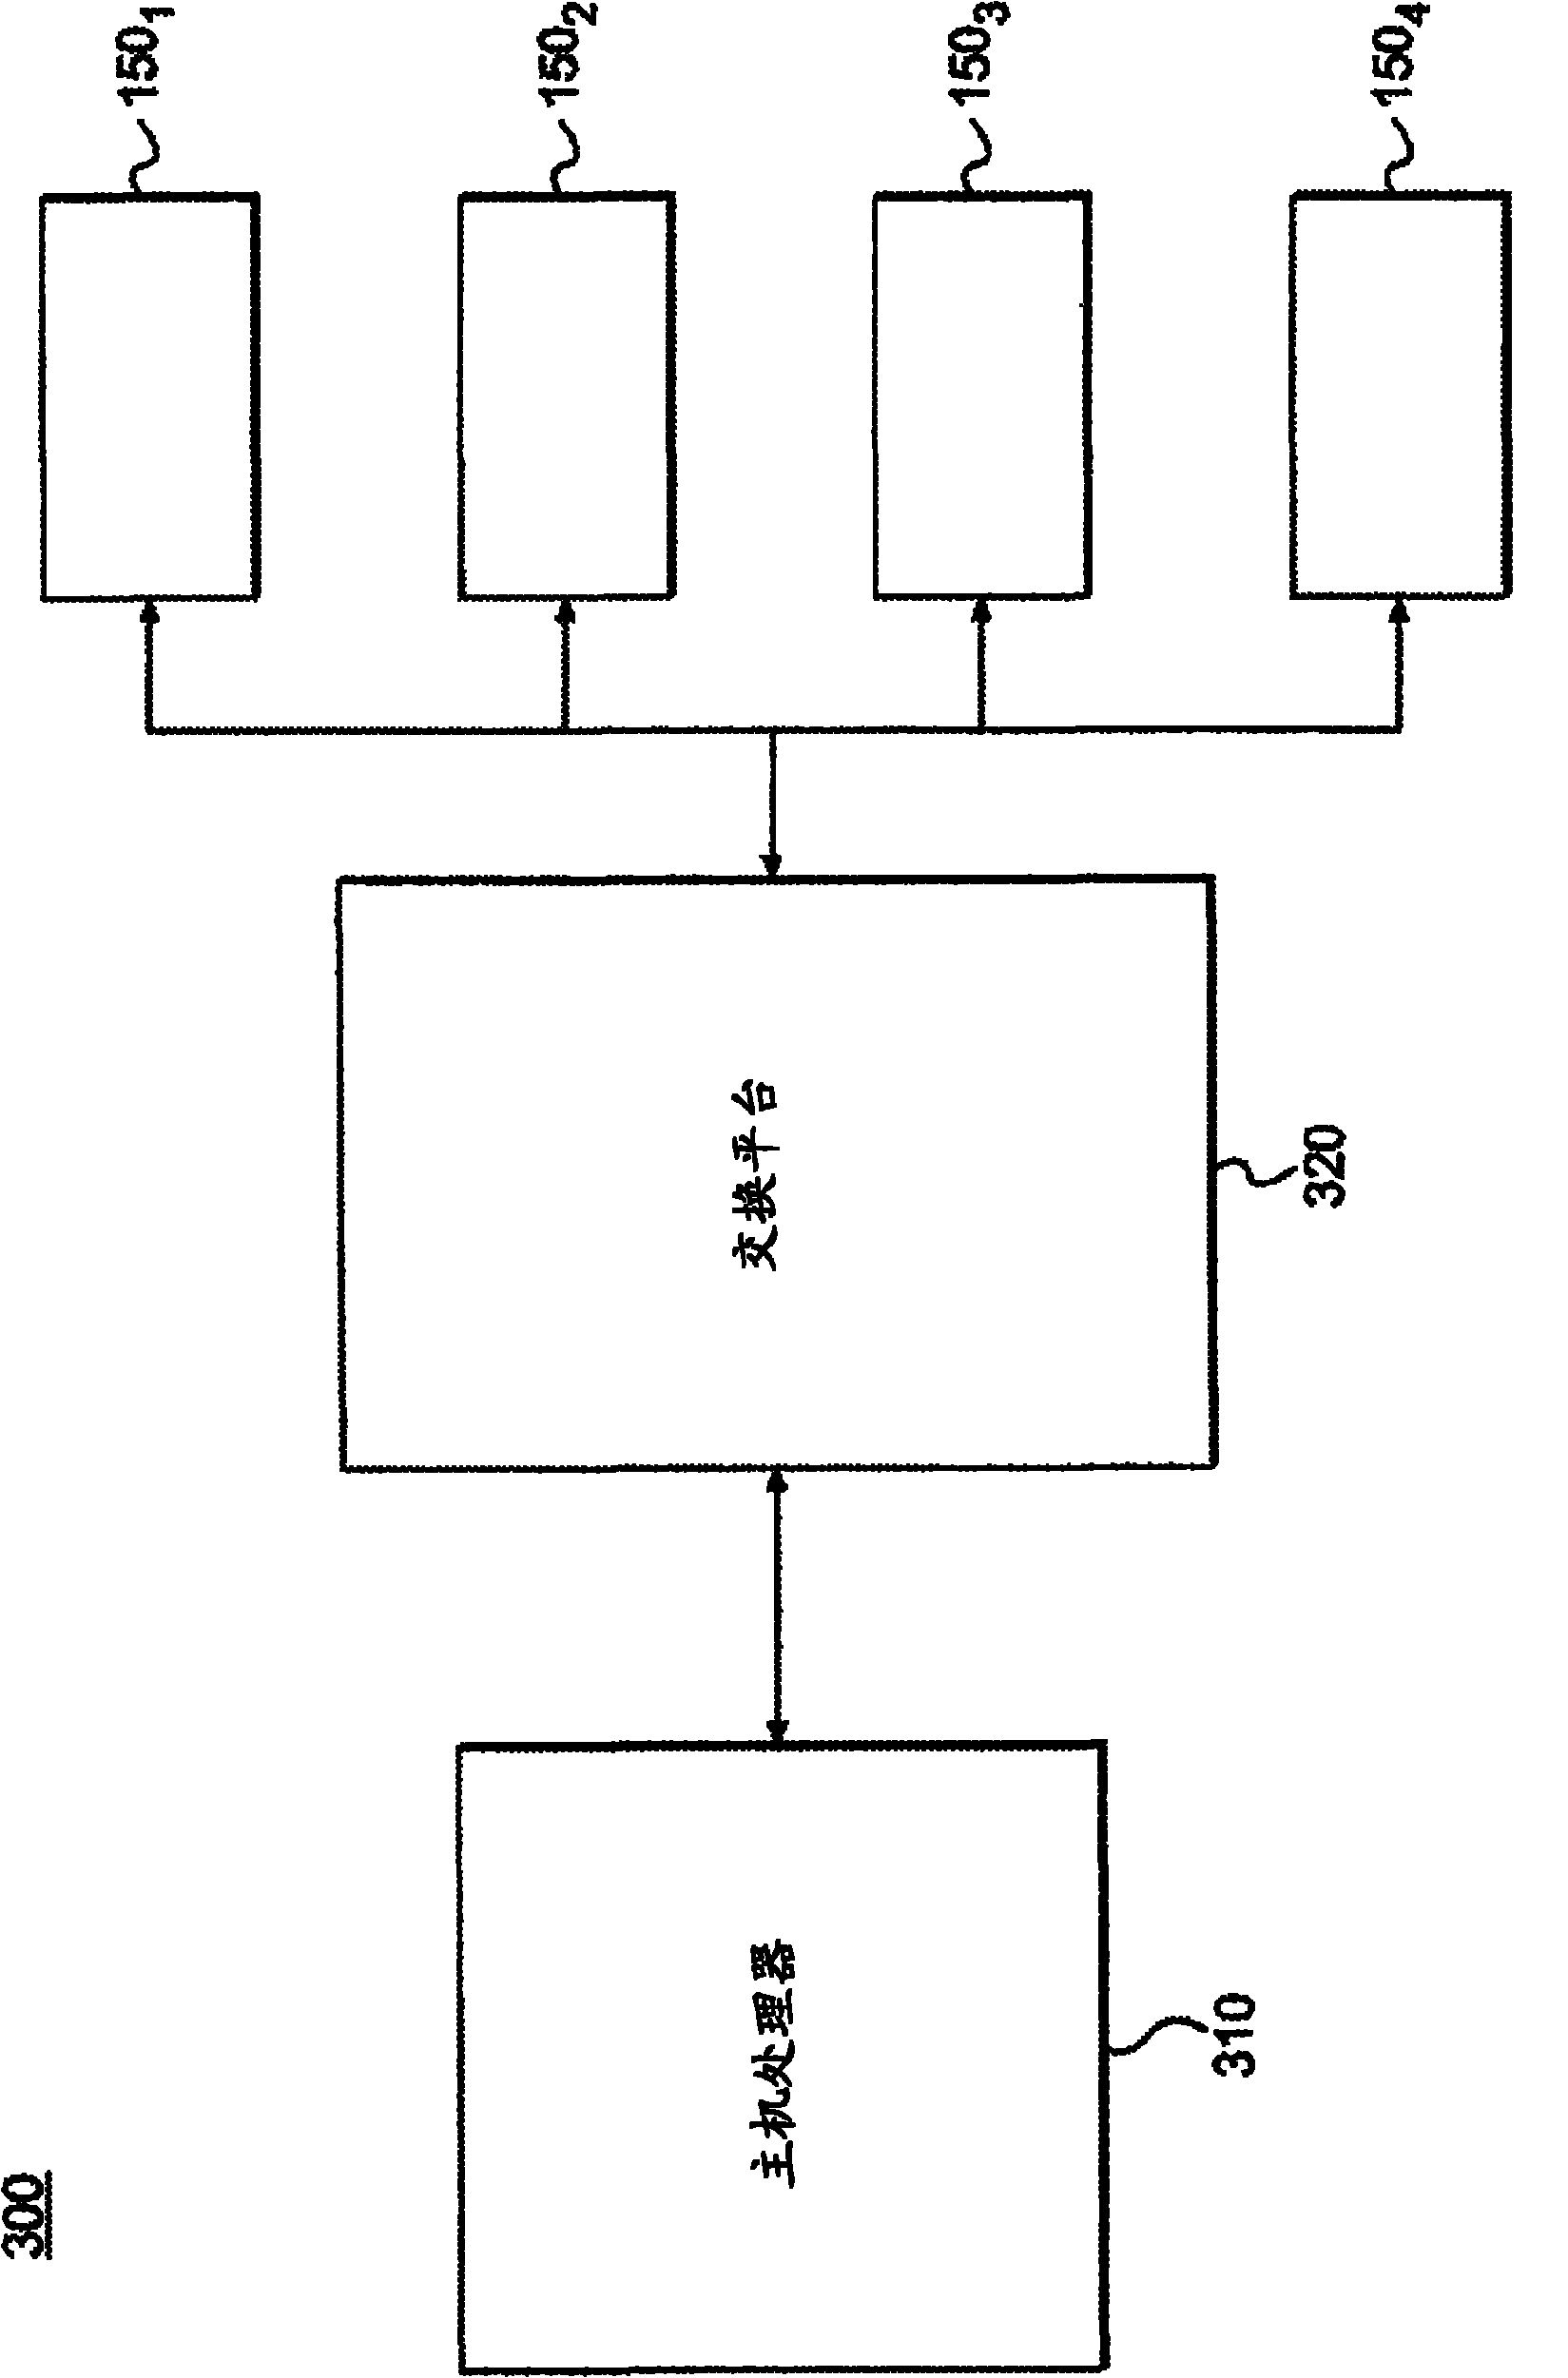 System and method for transforming PCIE SR-IOV functions to appear as legacy functions